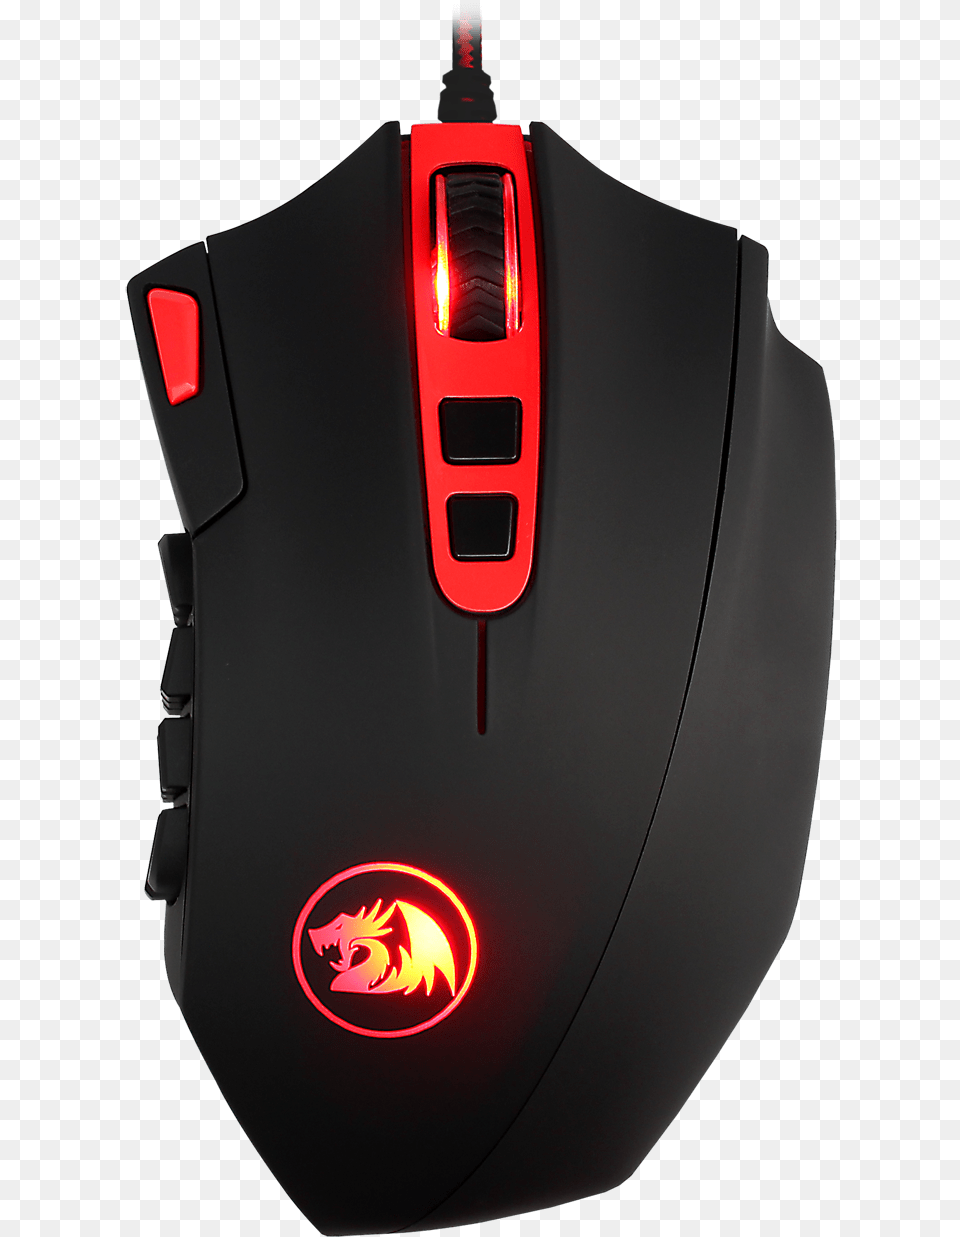 1 Redragon Perdition 2, Computer Hardware, Electronics, Hardware, Mouse Png